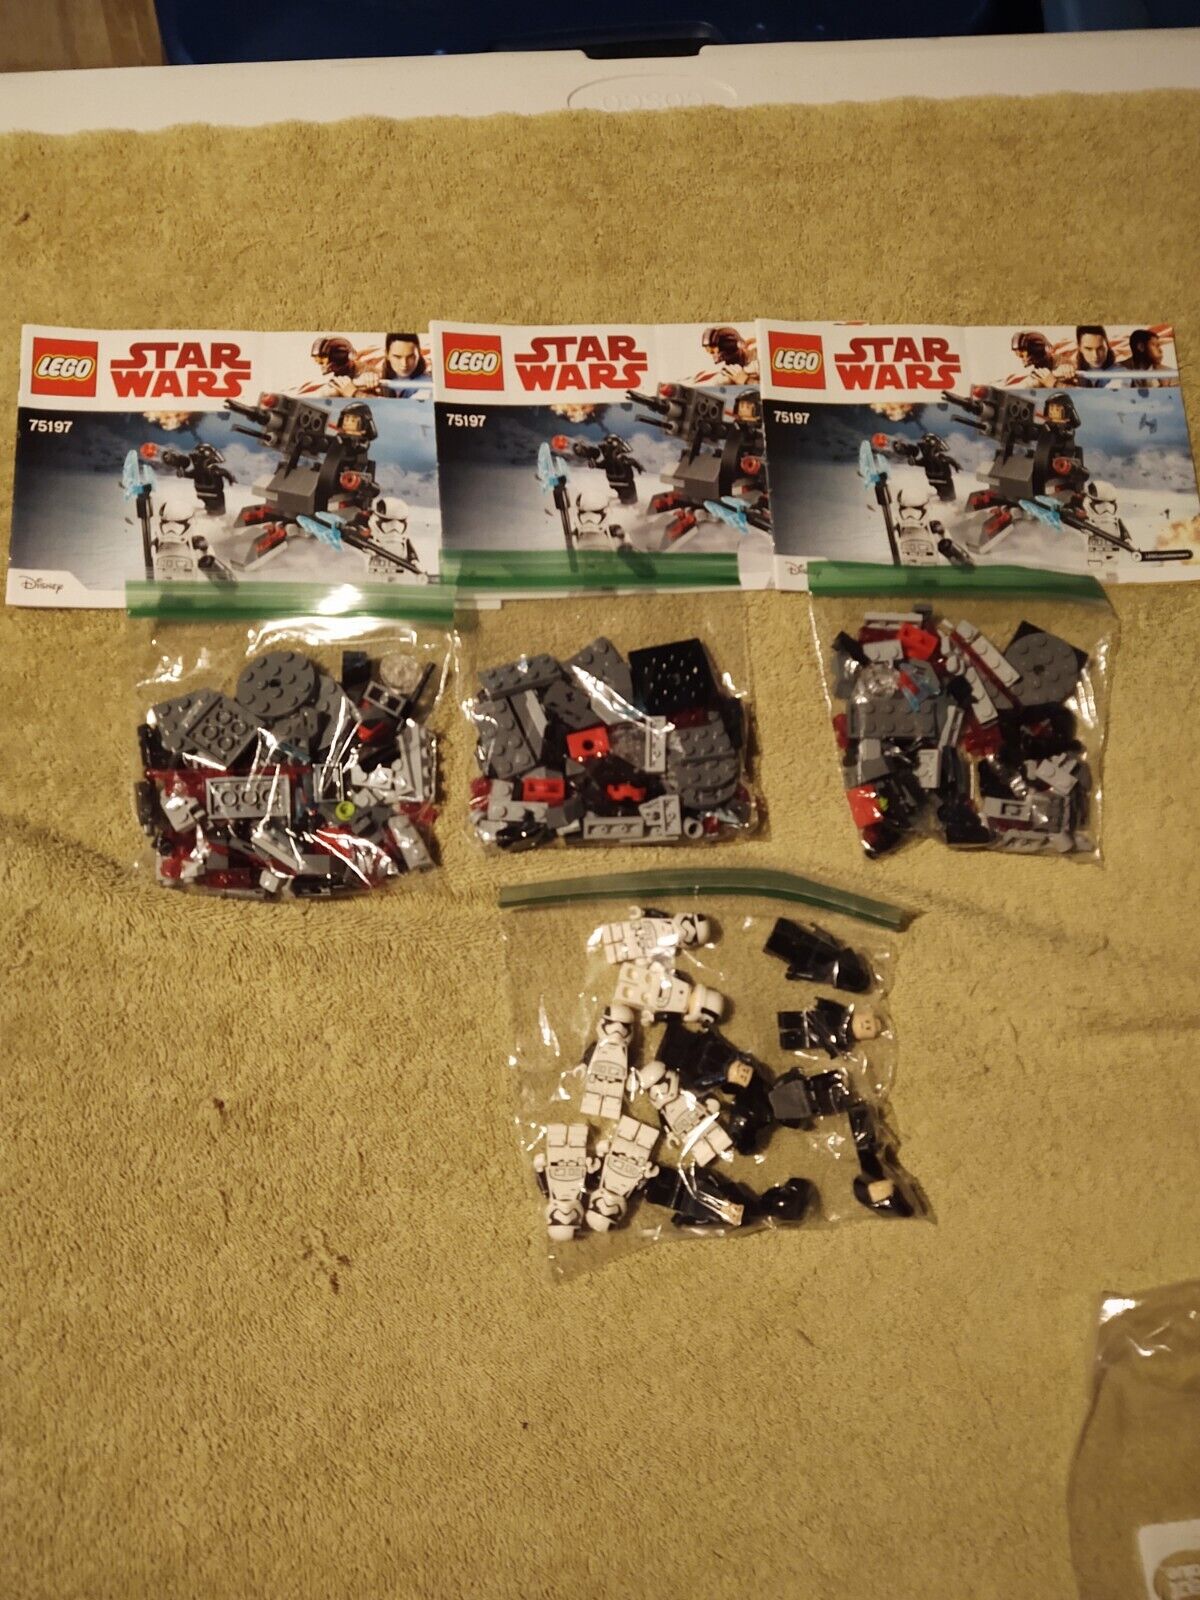 LEGO Star Wars 75197 First Order Specialists Battle Pack Lot 3 Complete Sets